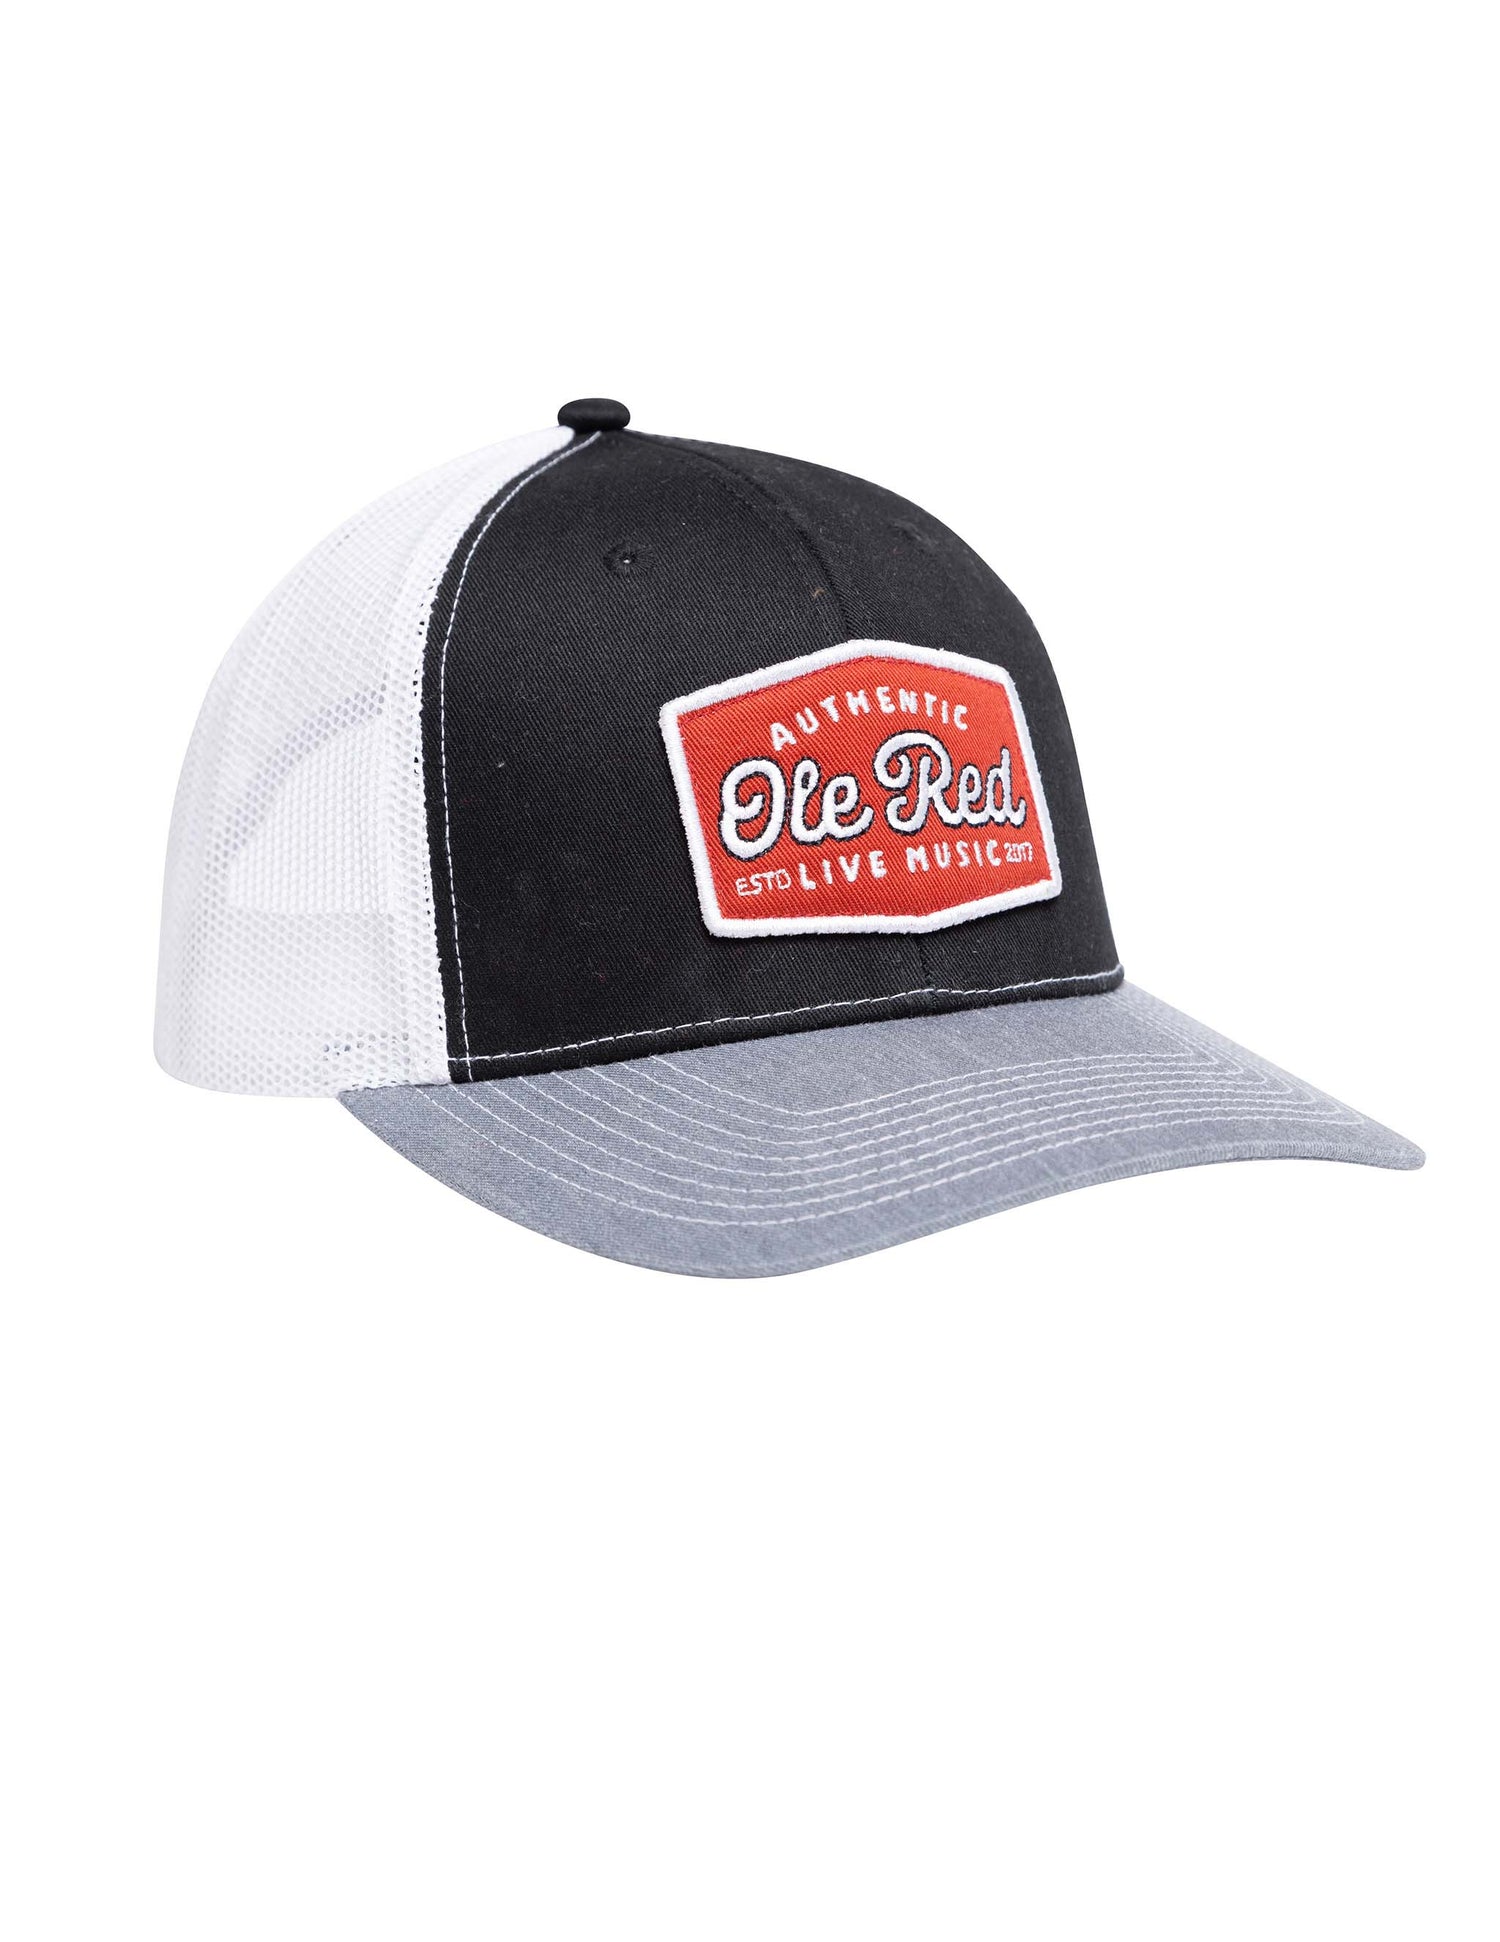 Ole Red Live Music Youth Baseball Cap